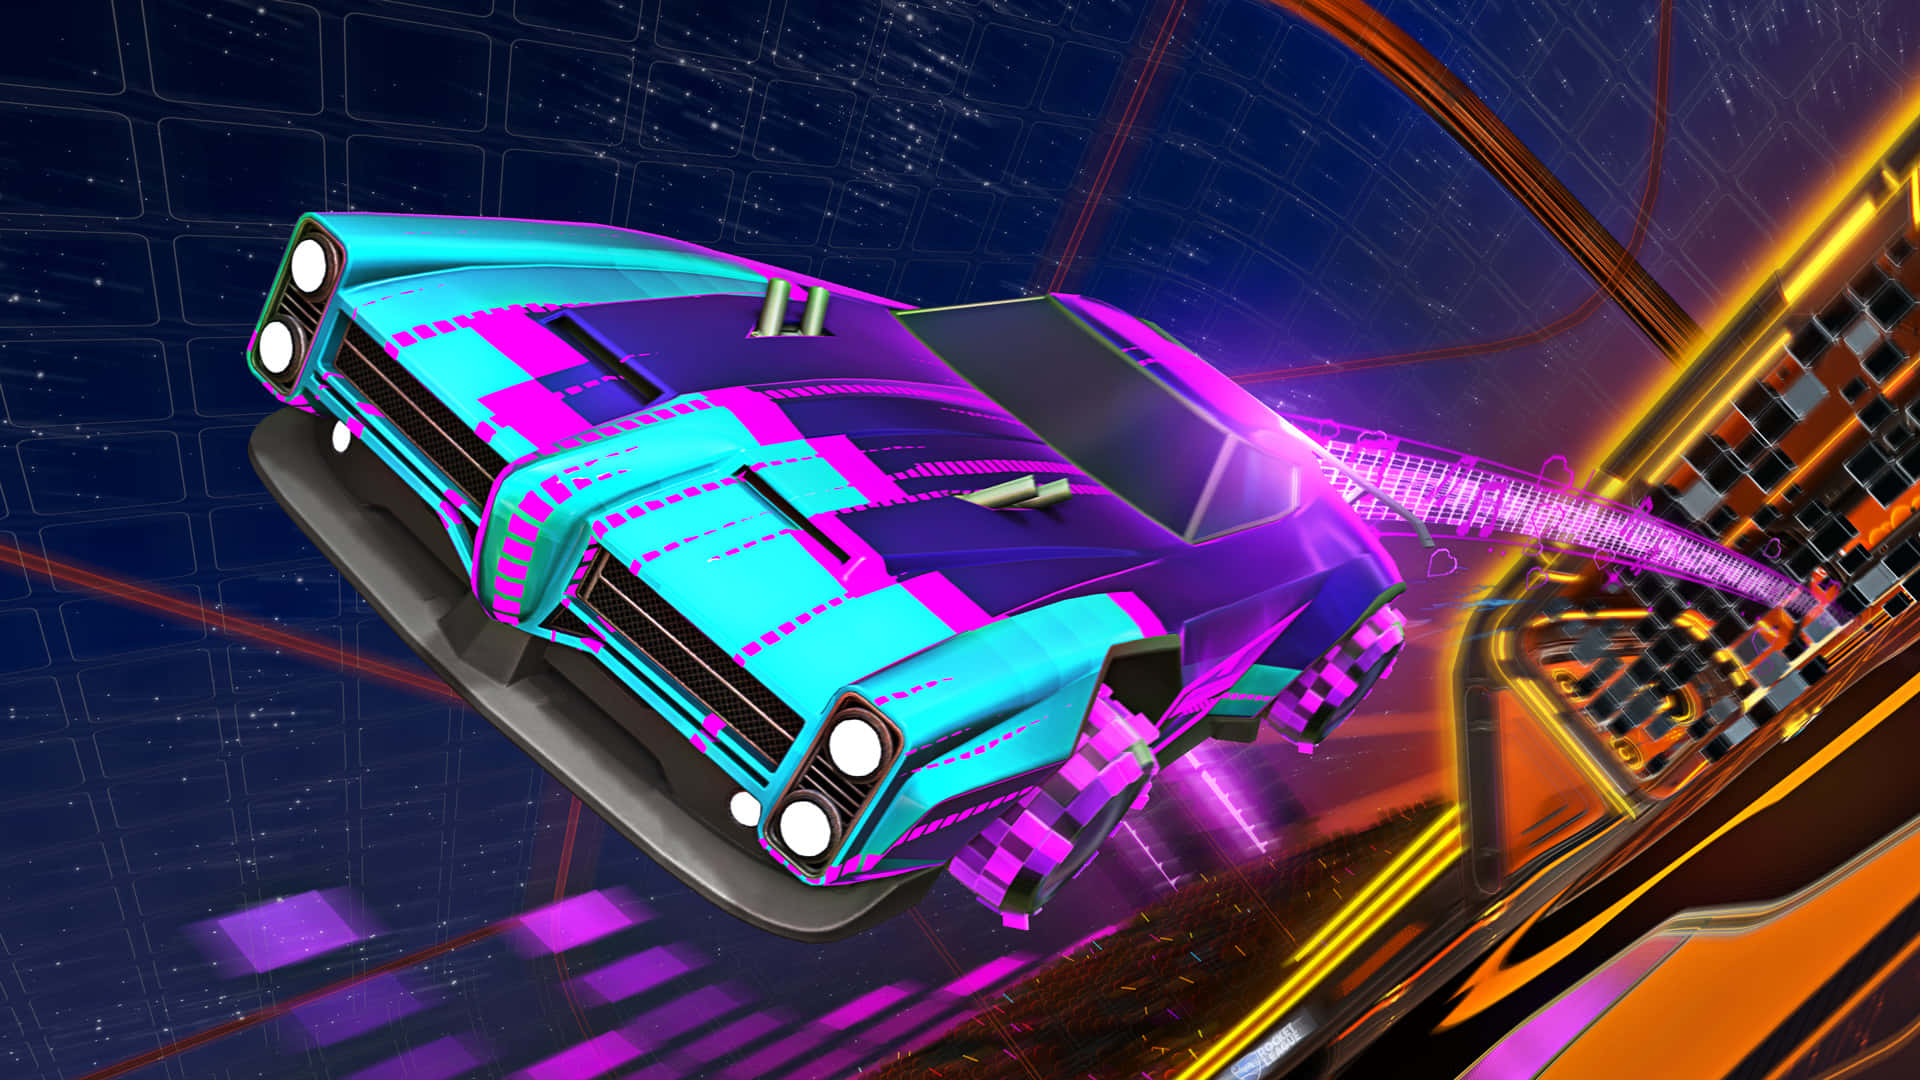 Enjoy thrilling Rocket League gameplay with crystal clear, 1080p resolution.